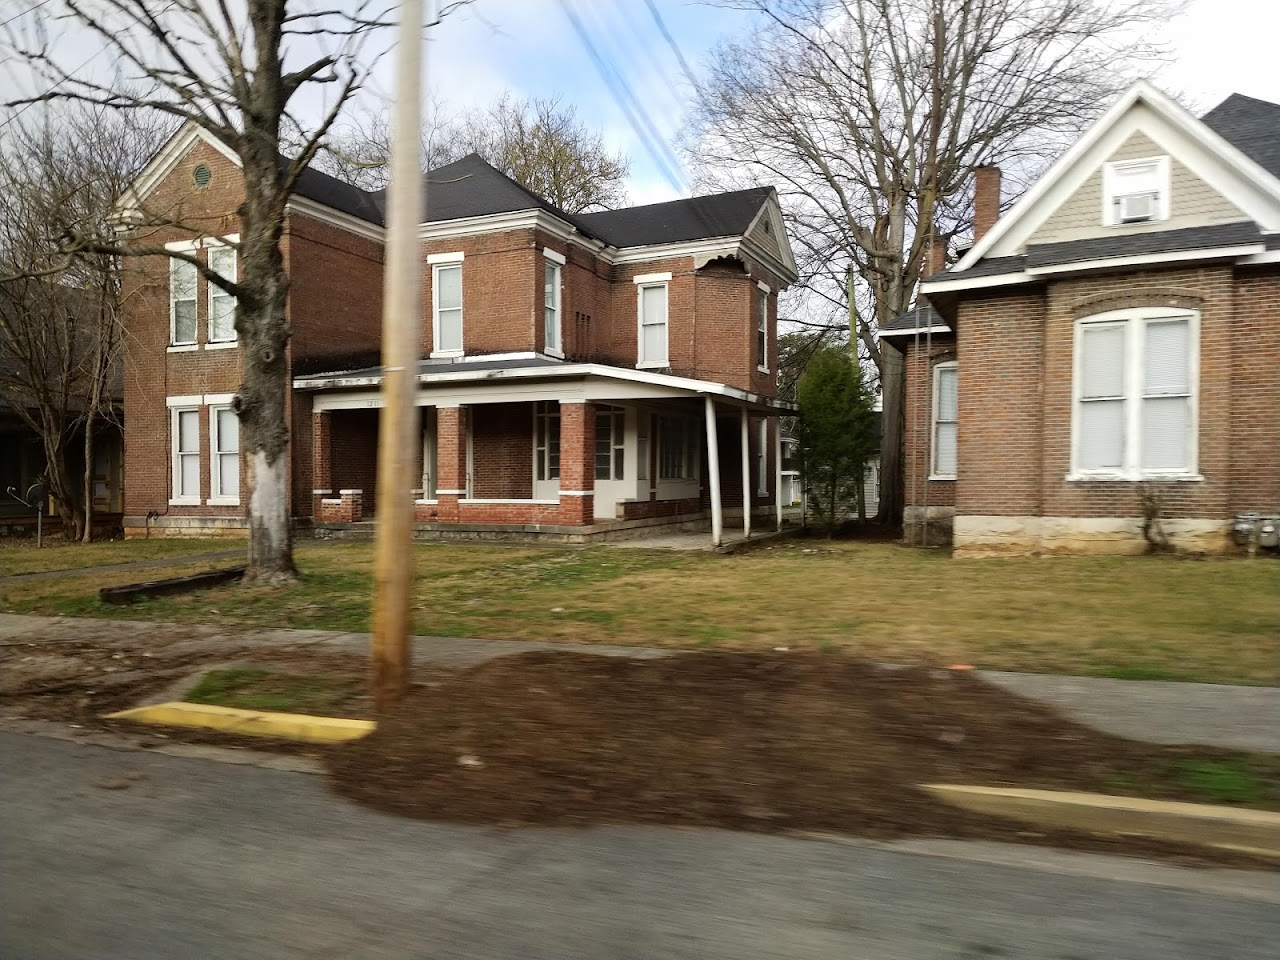 Photo of GRANT VILLAGE at 12TH AVE. EAST BOWLING GREEN, KY 42101